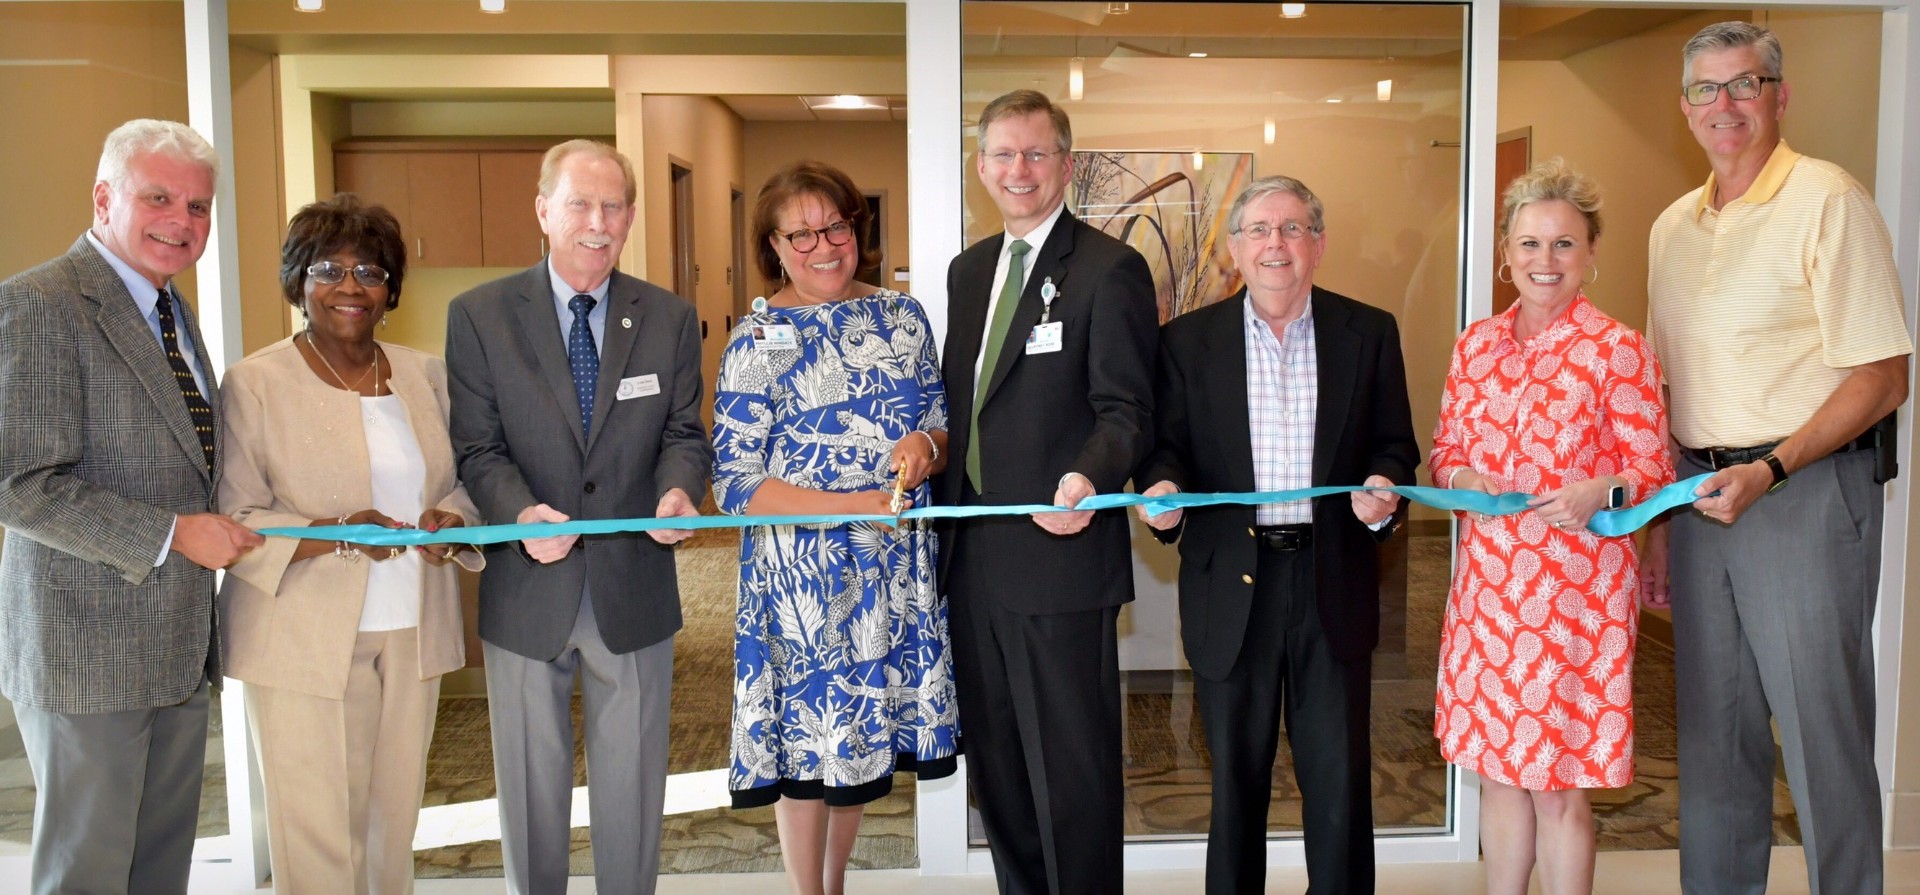 New Atrium Health Heart and Vascular Tower Expands Cardiovascular, Radiology Services for Patients in Cabarrus, Rowan County Regions